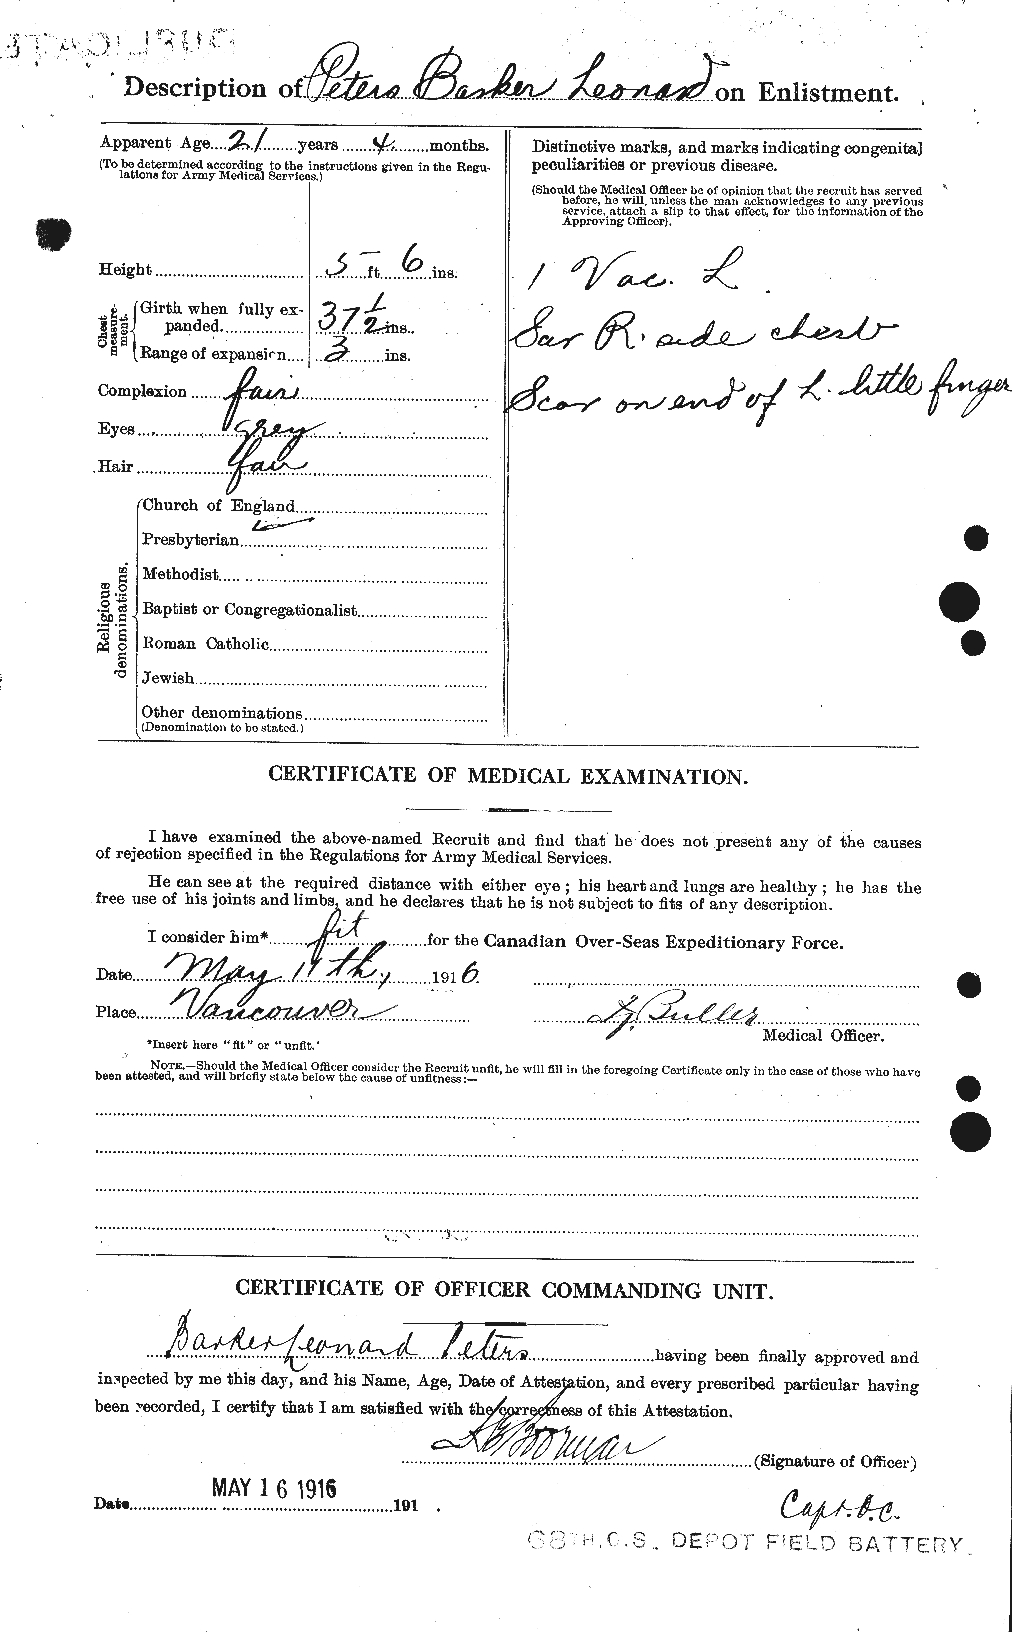 Personnel Records of the First World War - CEF 575359b